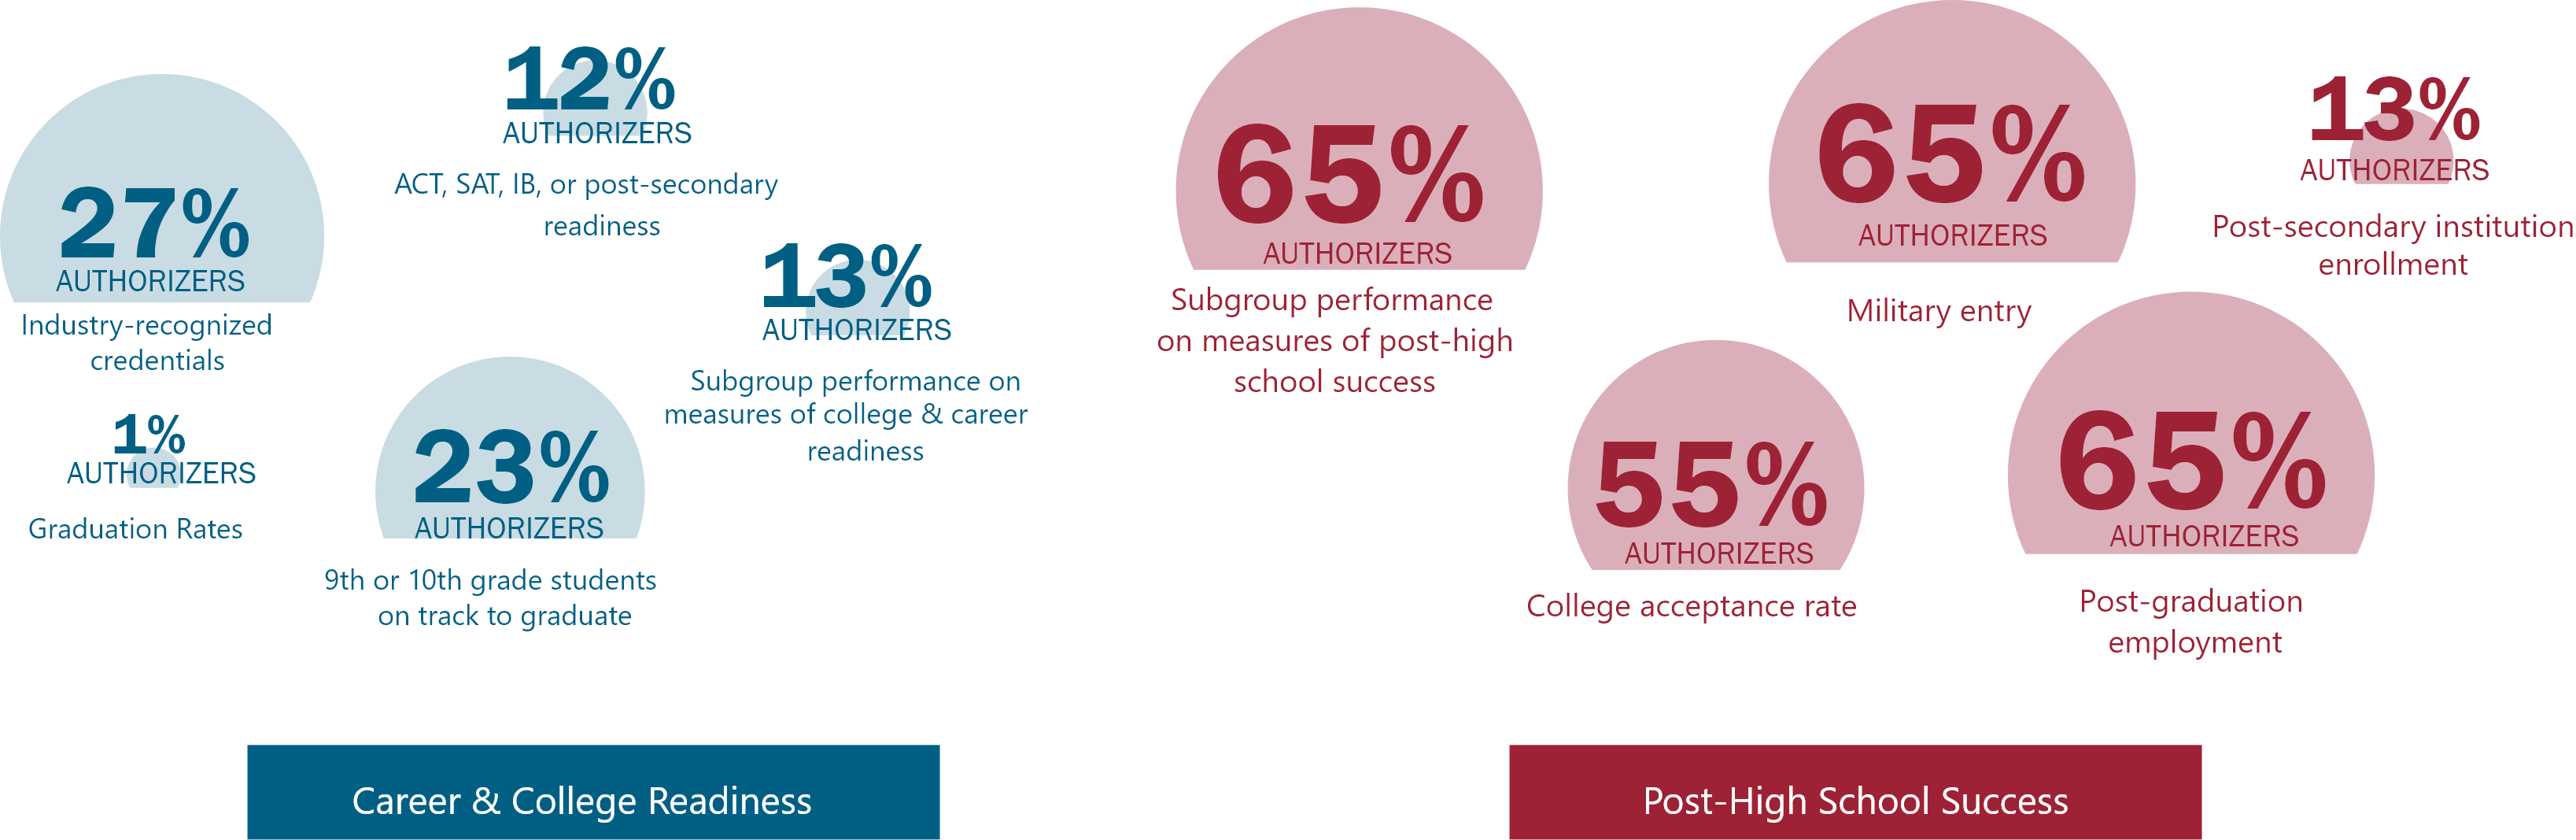 Many authorizers don’t have access to college and career readiness data